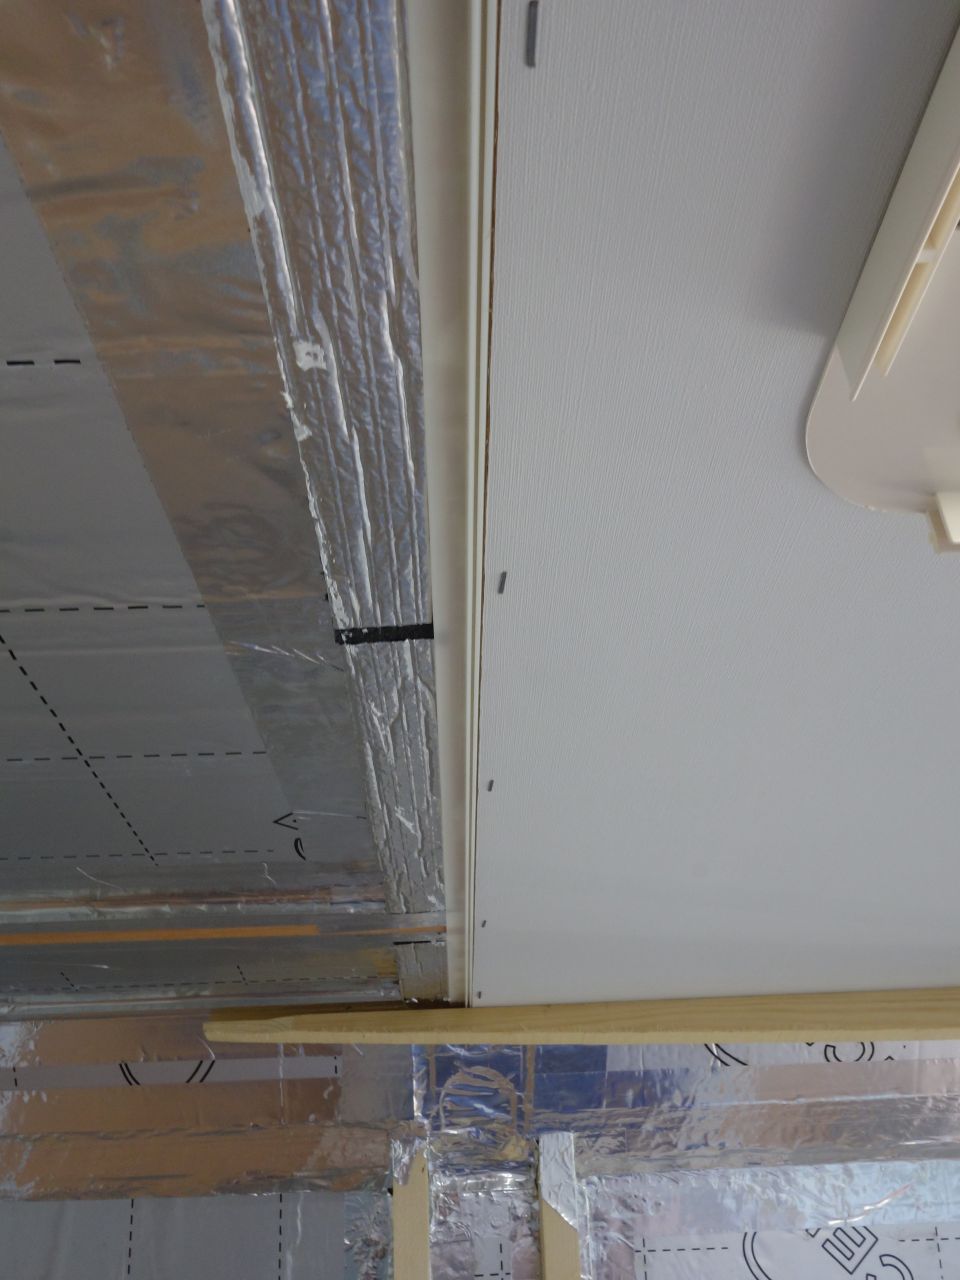 ceiling panel joining strip